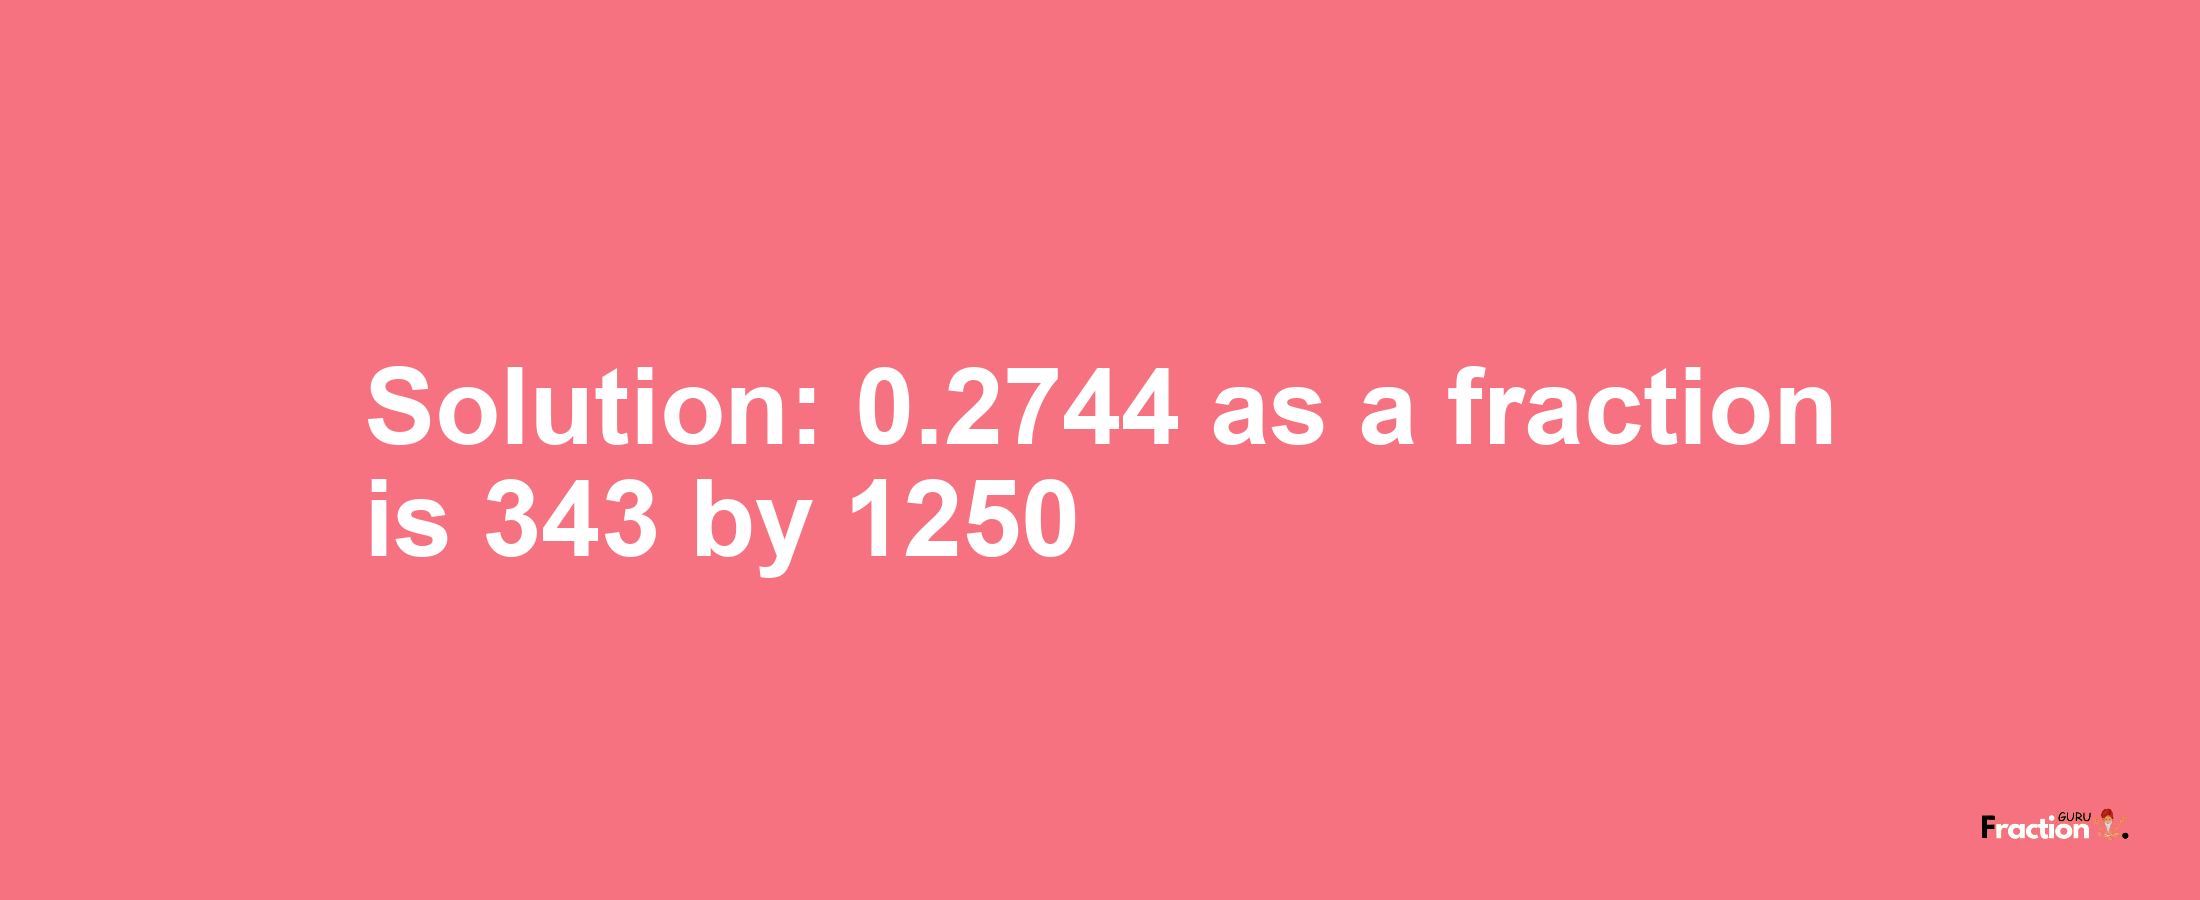 Solution:0.2744 as a fraction is 343/1250